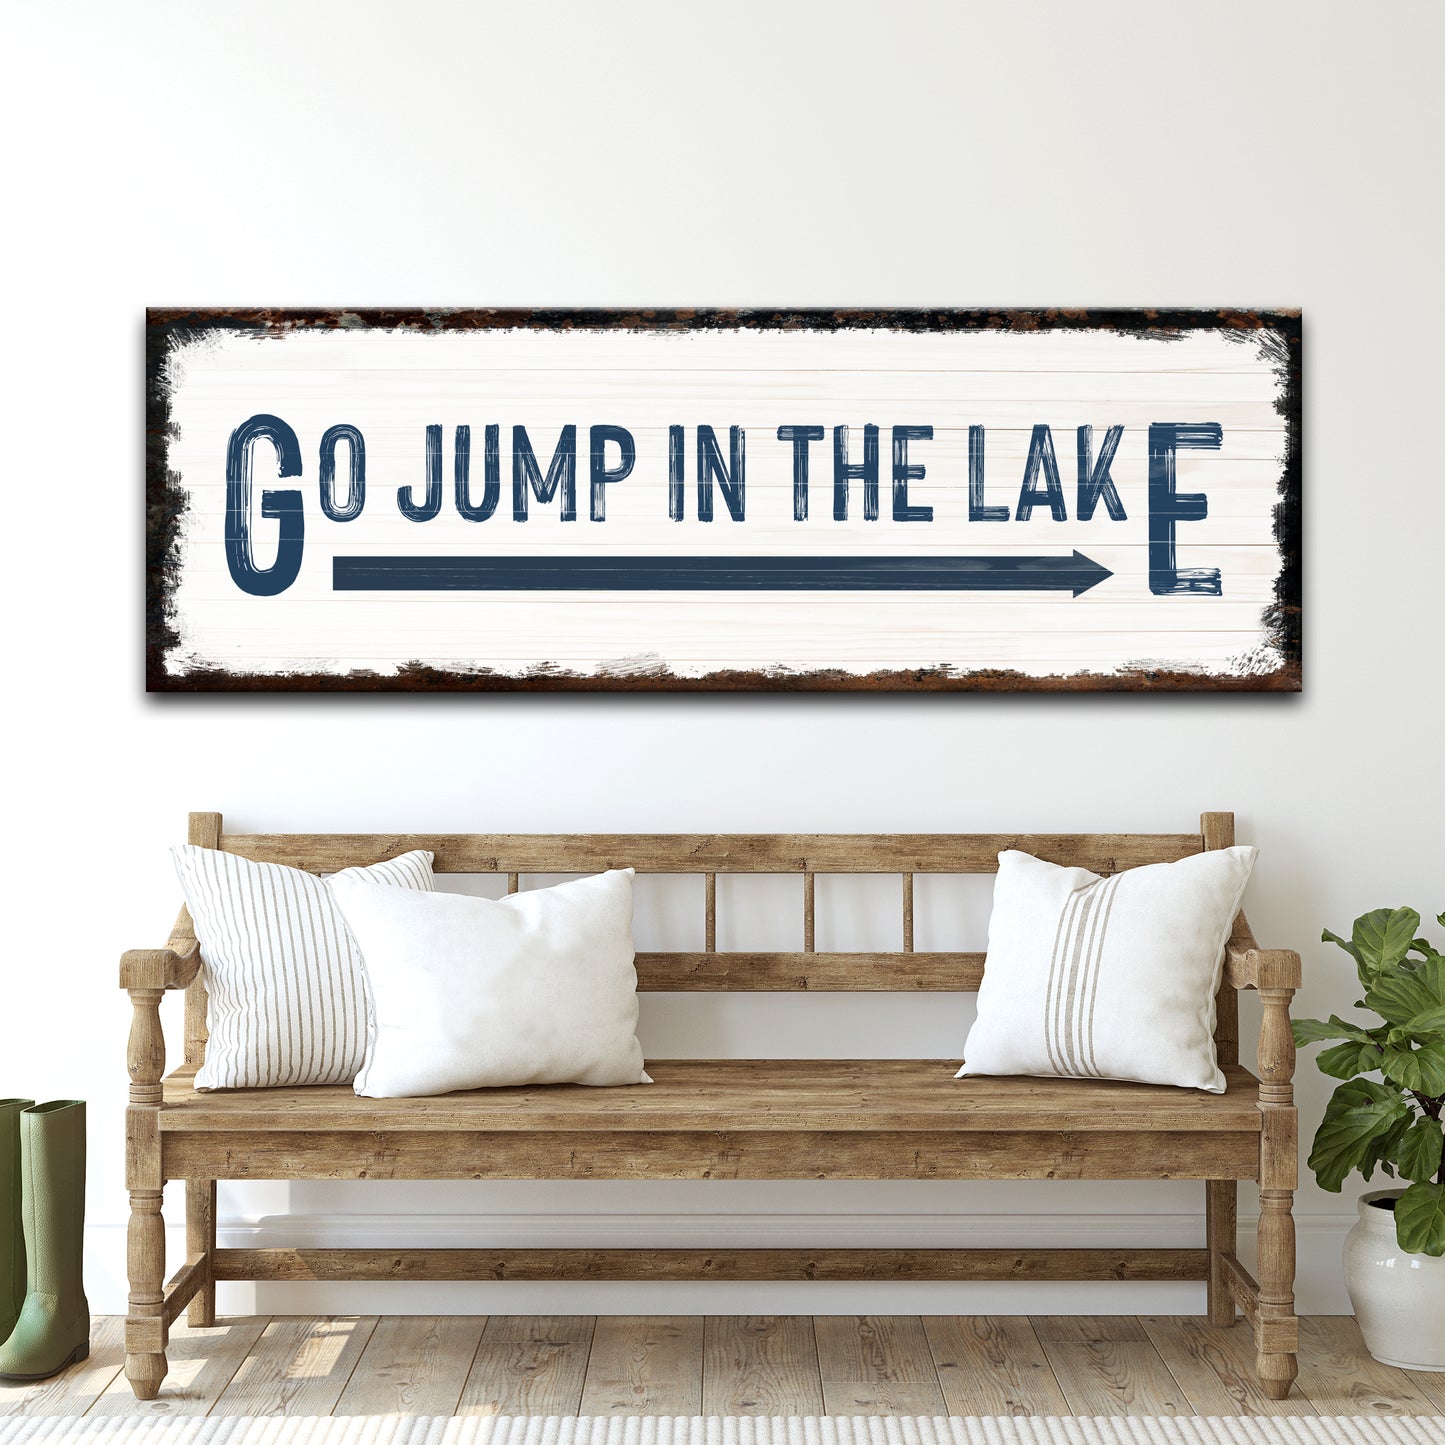 Go Jump In The Lake Sign - Image by Tailored Canvases